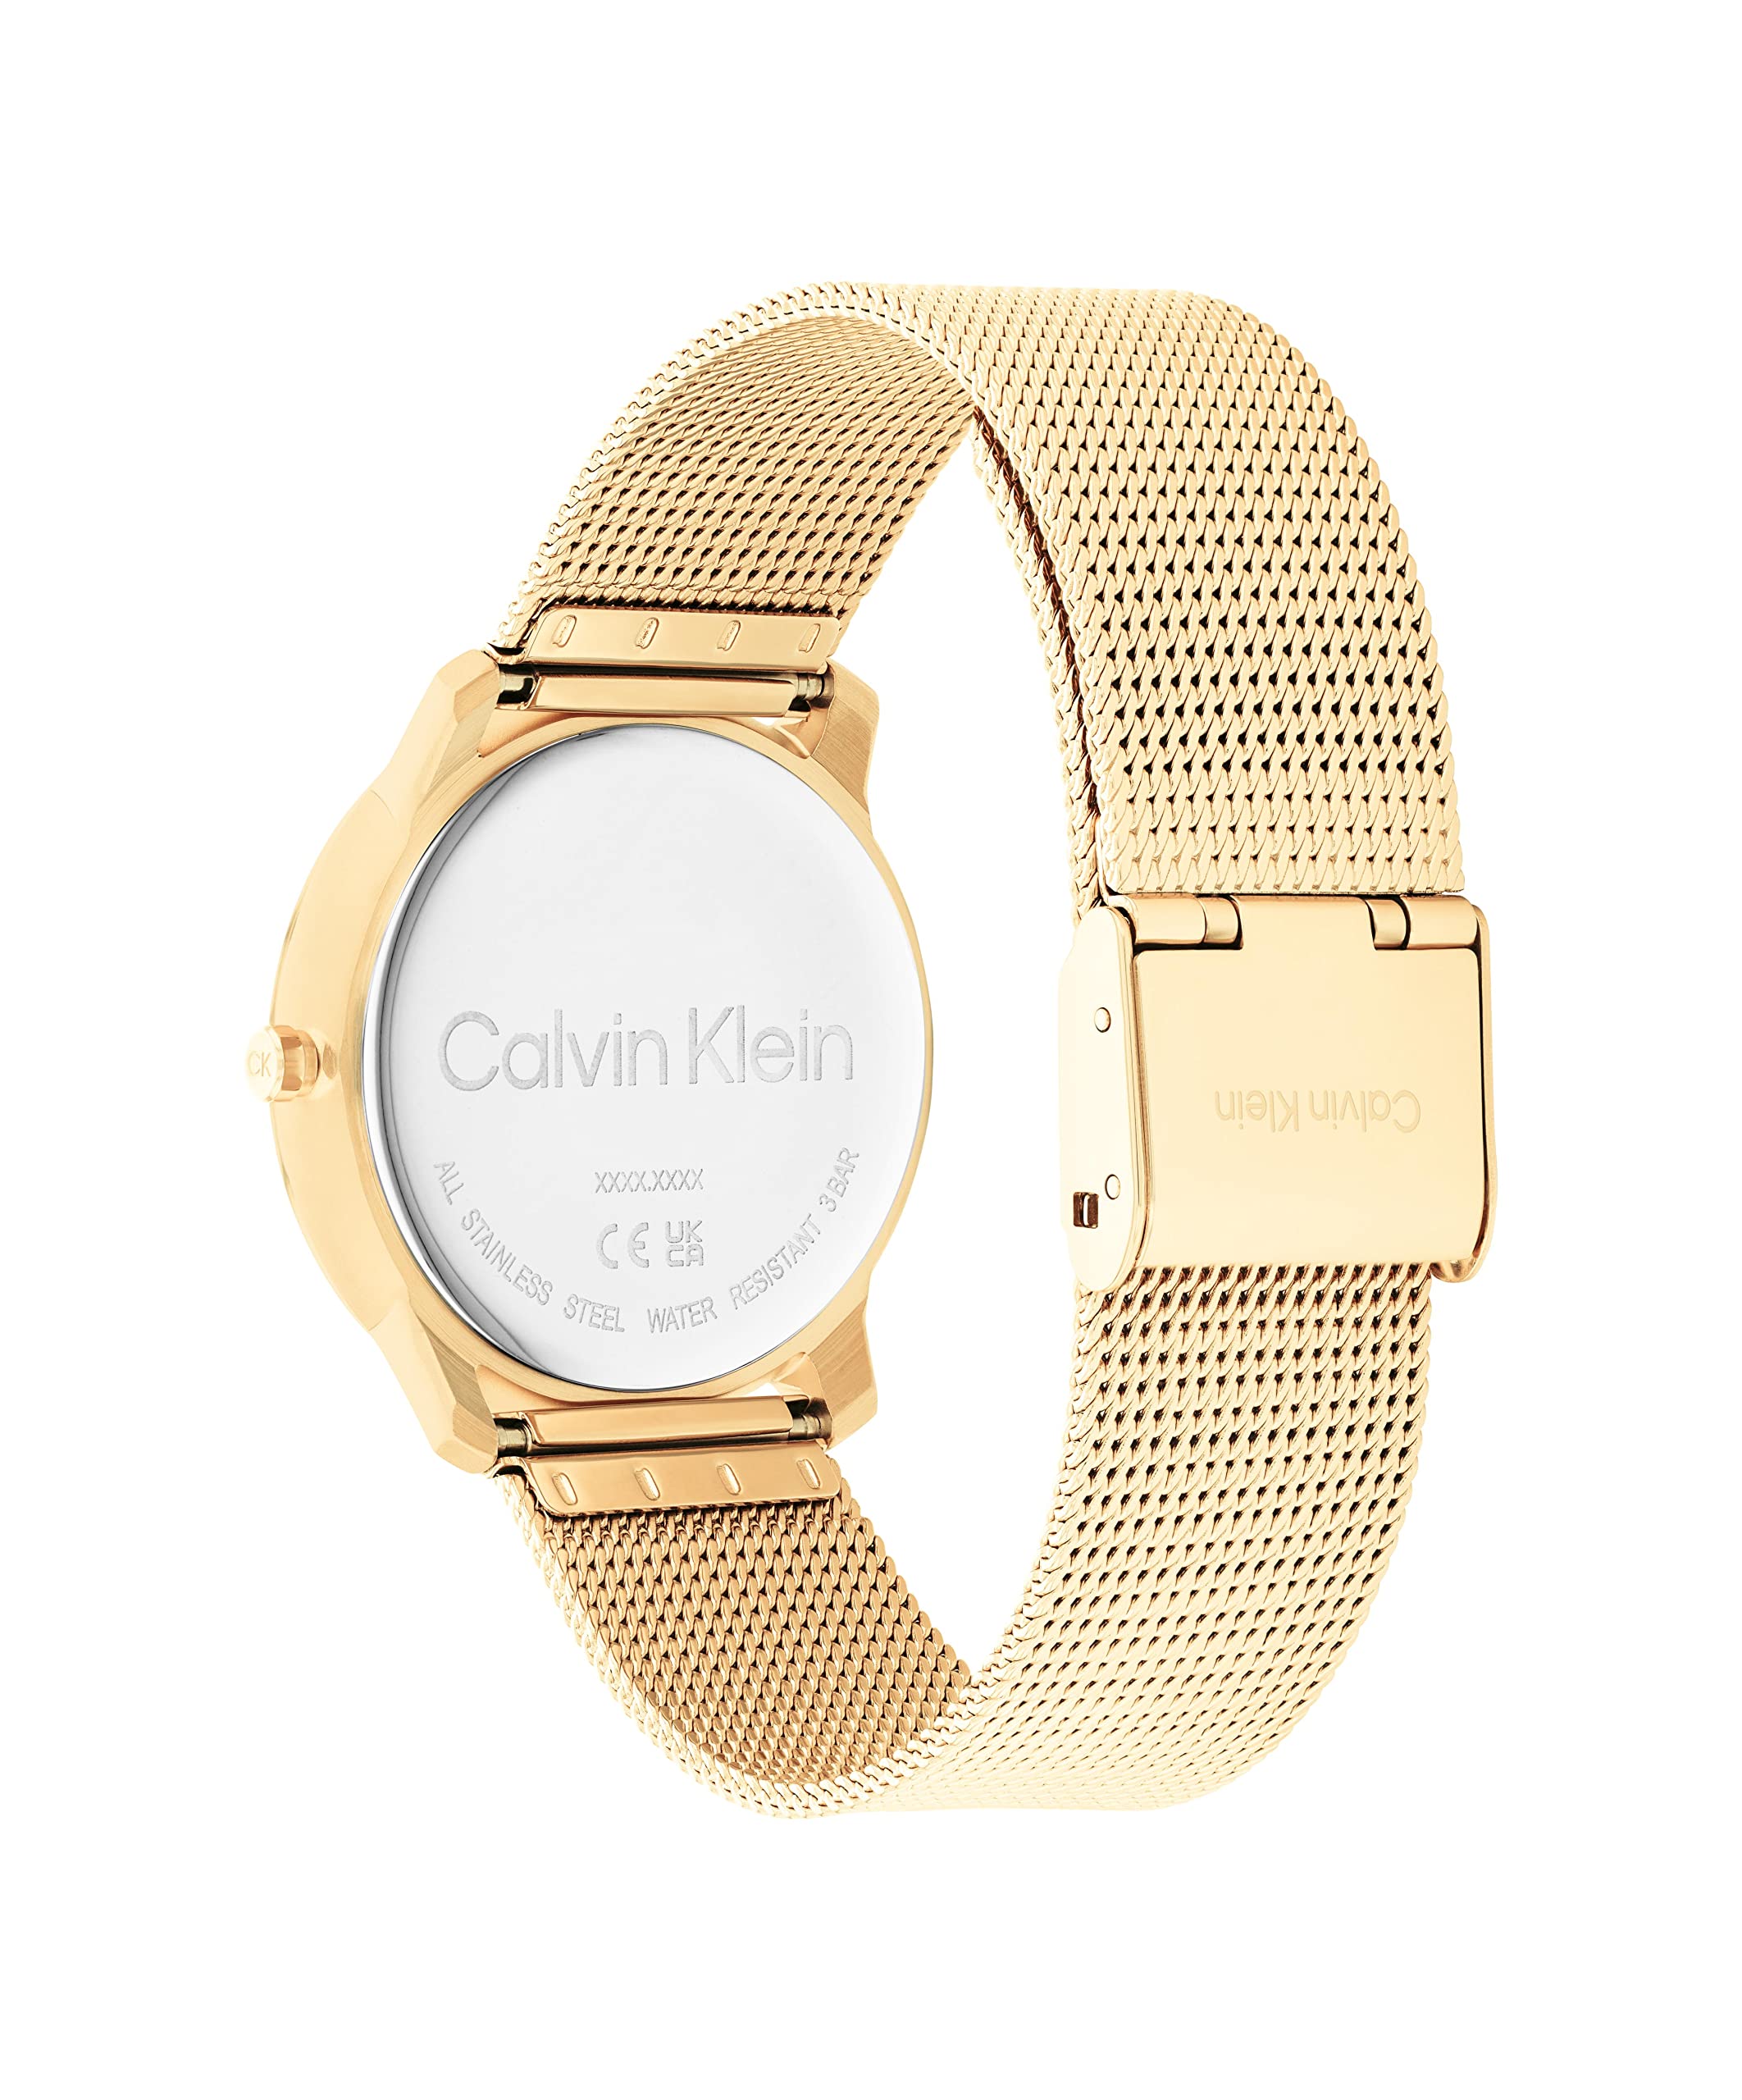 Calvin Klein Unisex Quartz Ionic Gold Plated Steel and Mesh Bracelet Watch, Color: Gold Plated (Model: 25200034)